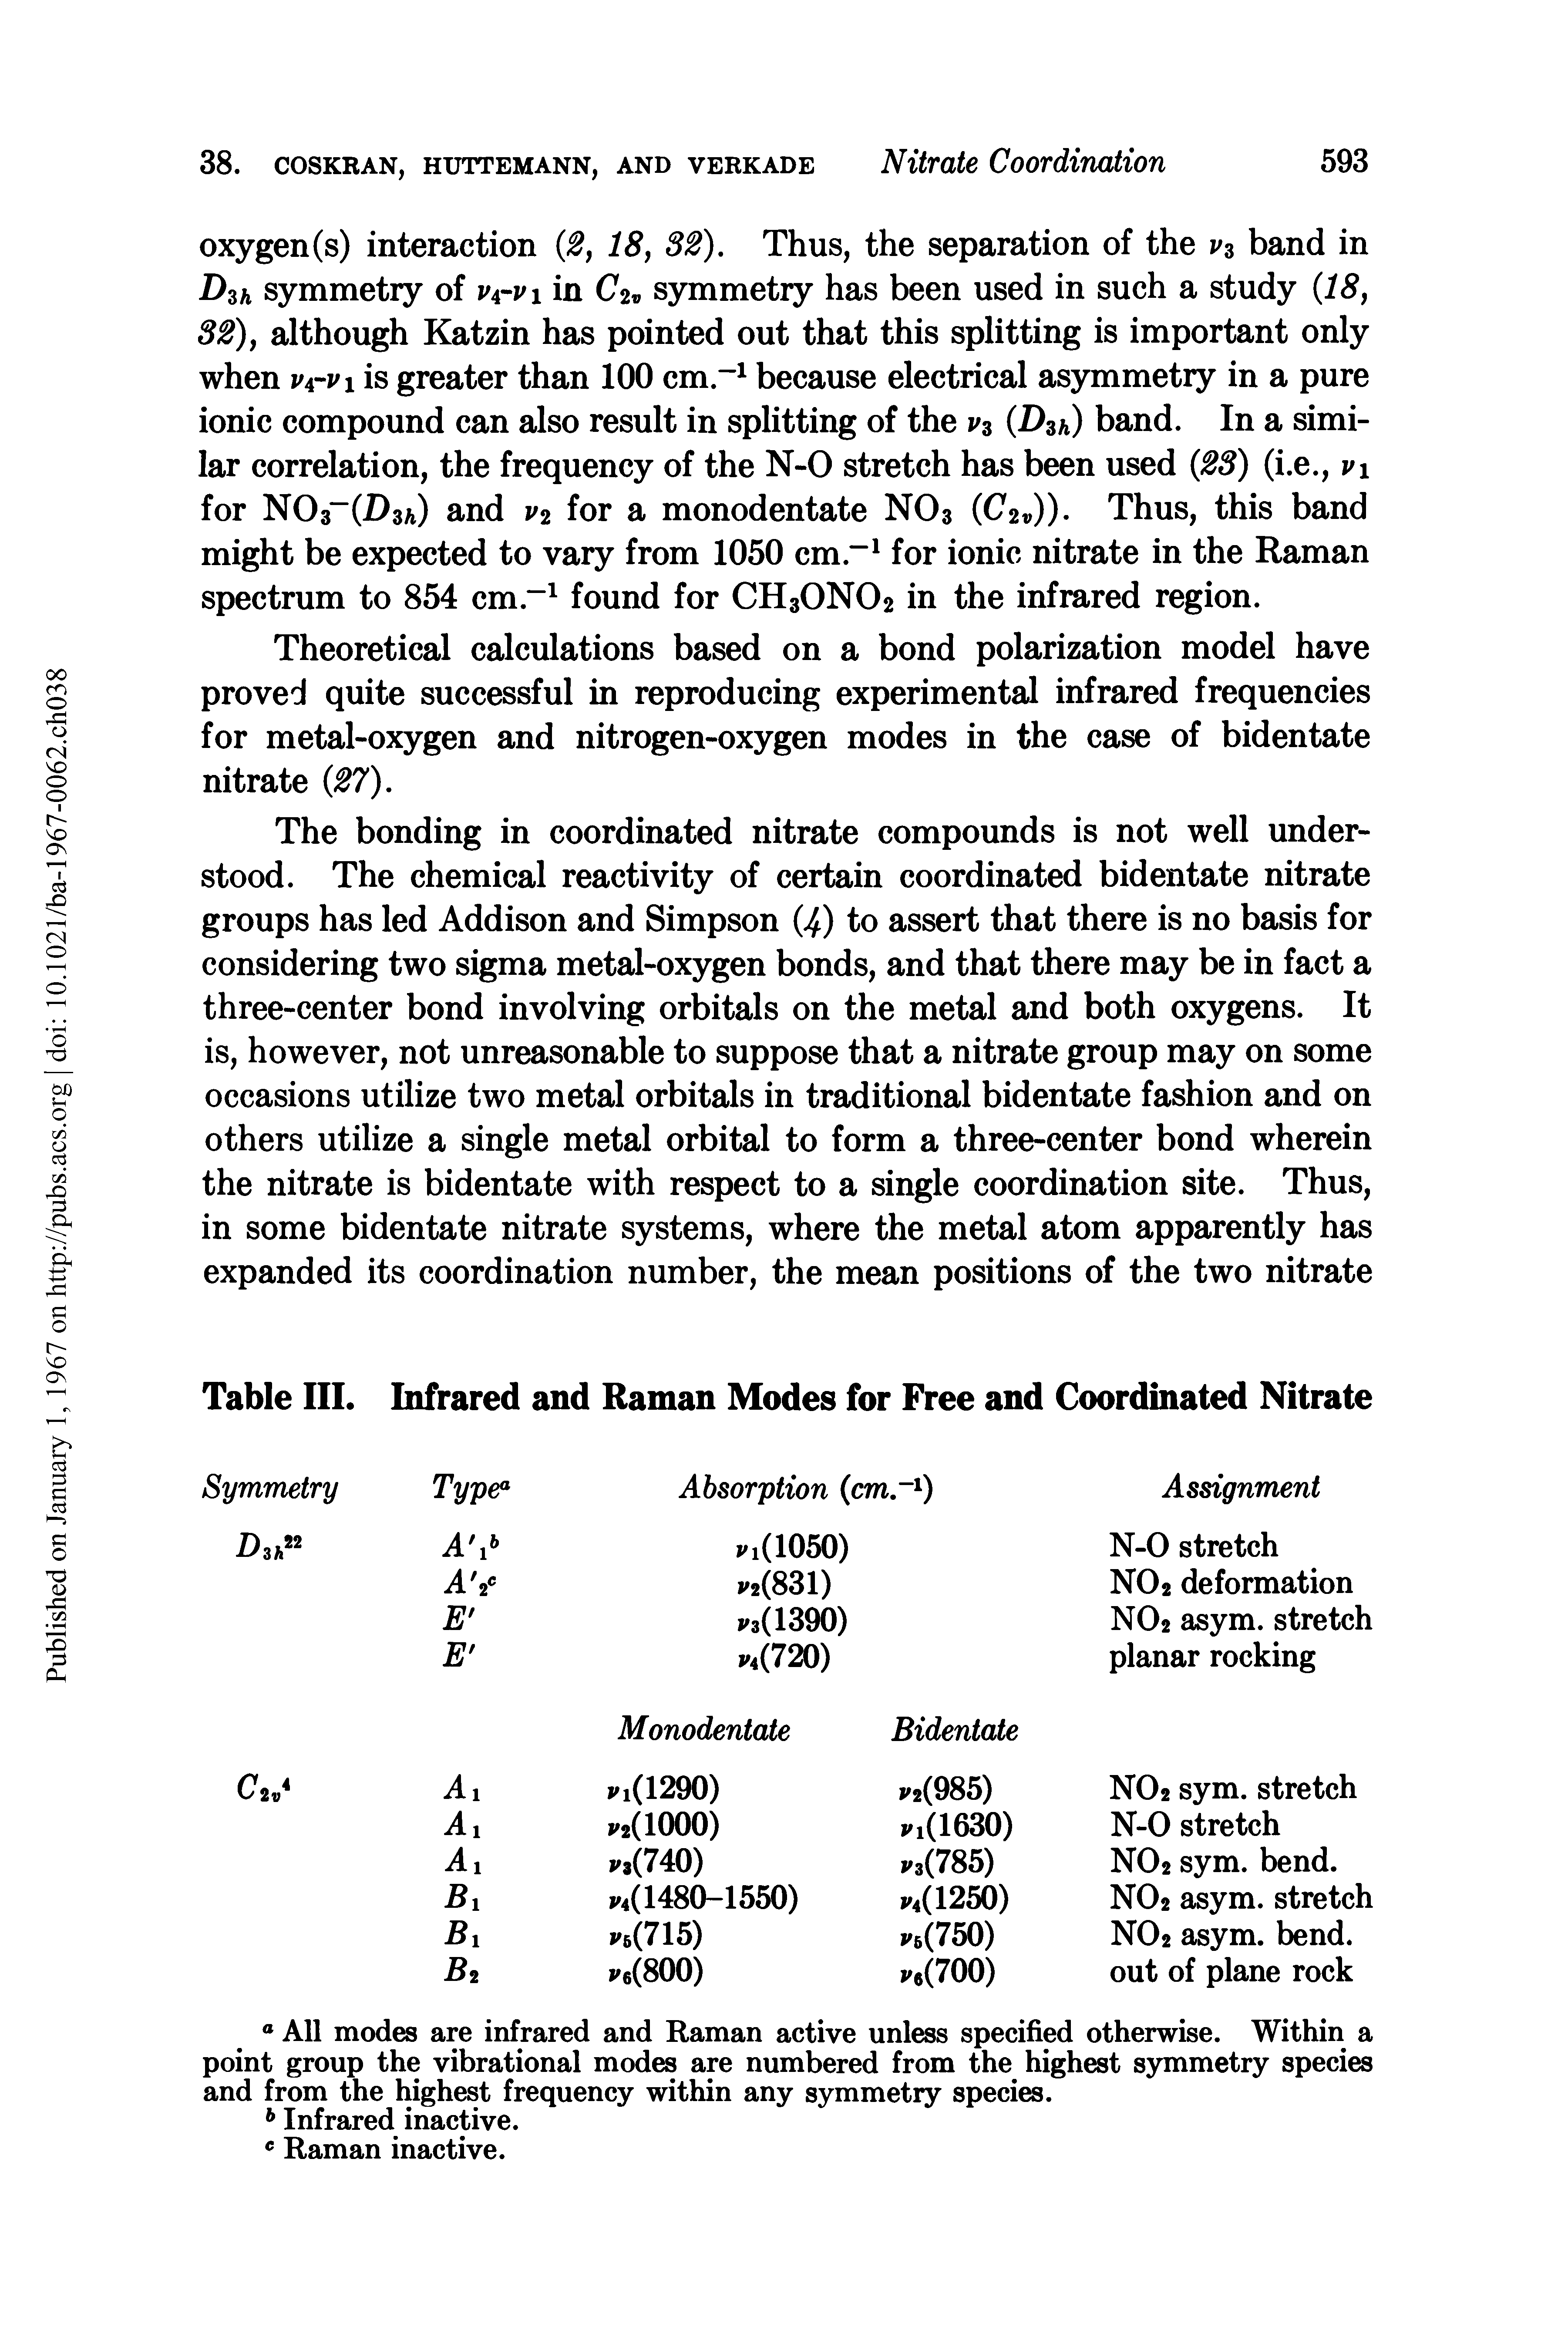 Table III. Infrared and Raman Modes for Free and Coordinated Nitrate...